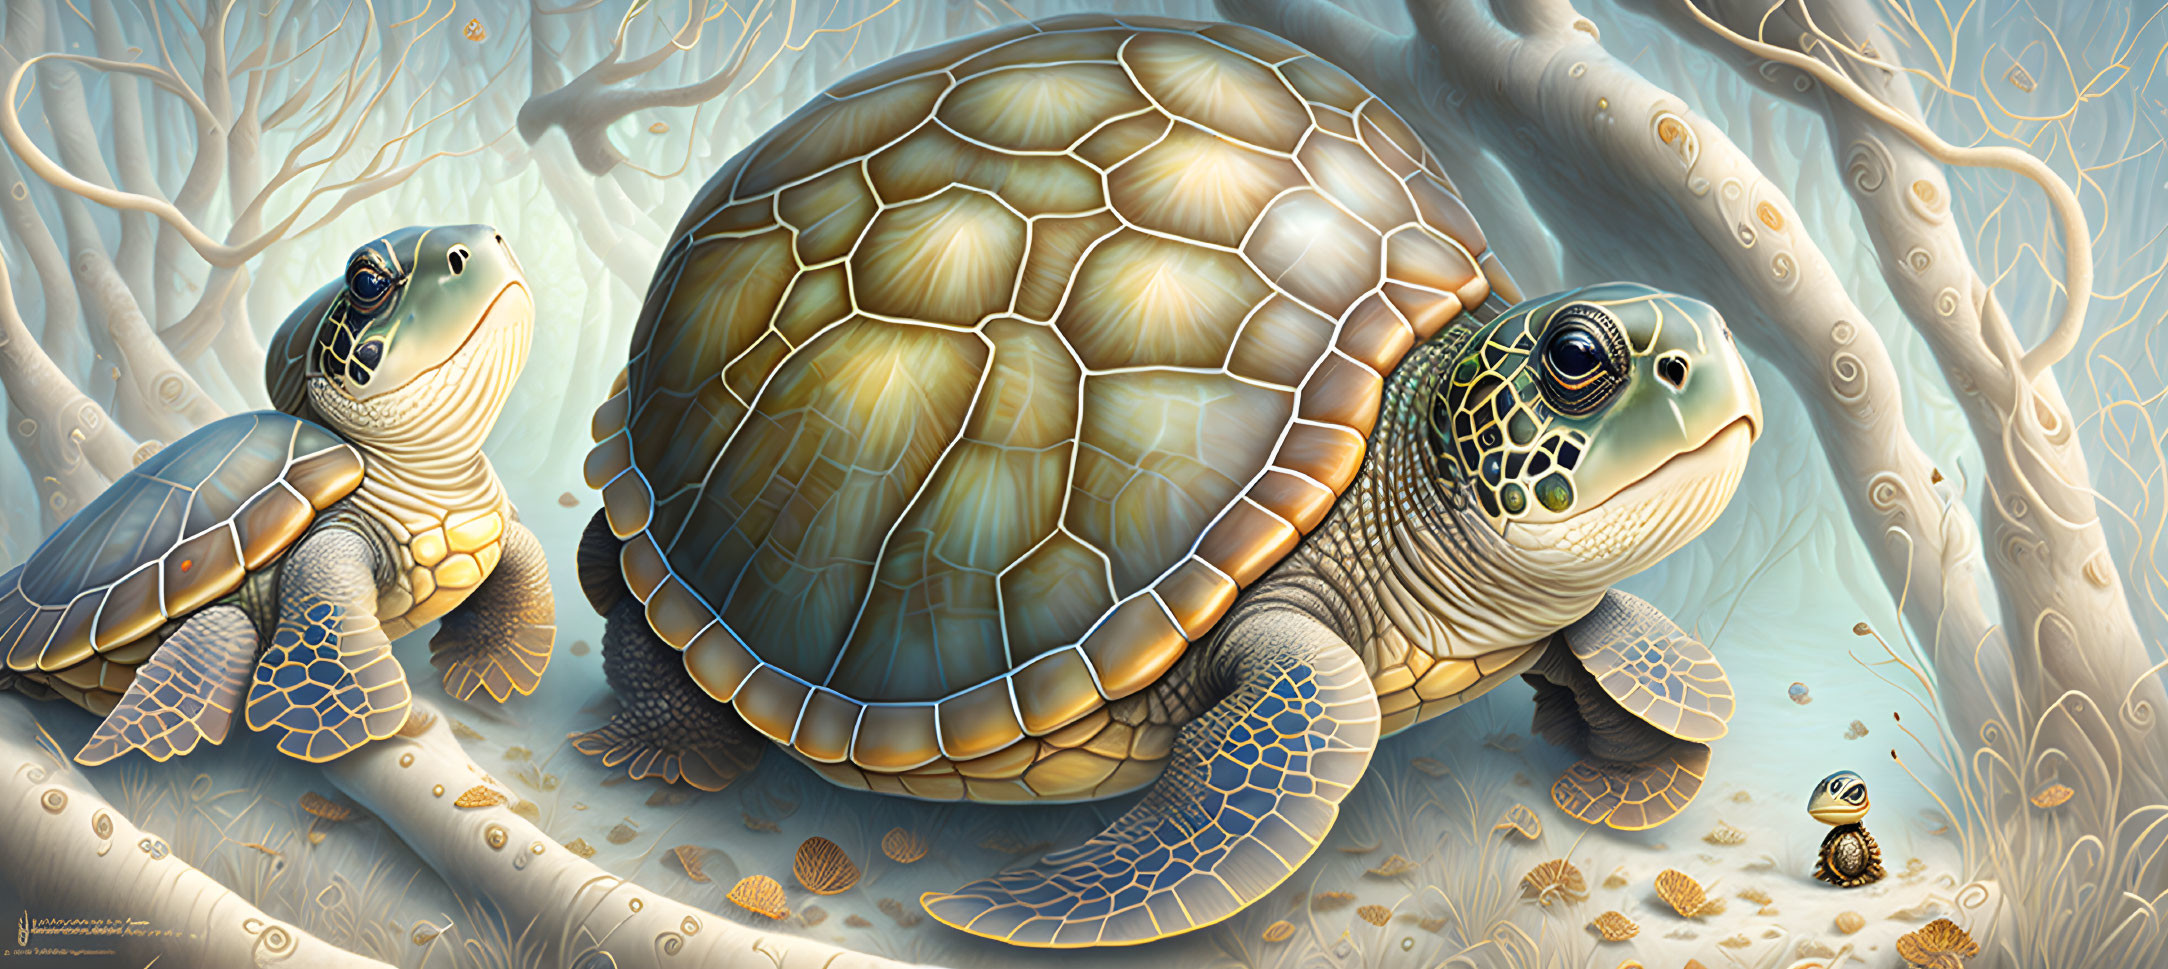 Illustrated sea turtles in ocean environment with aquatic plants